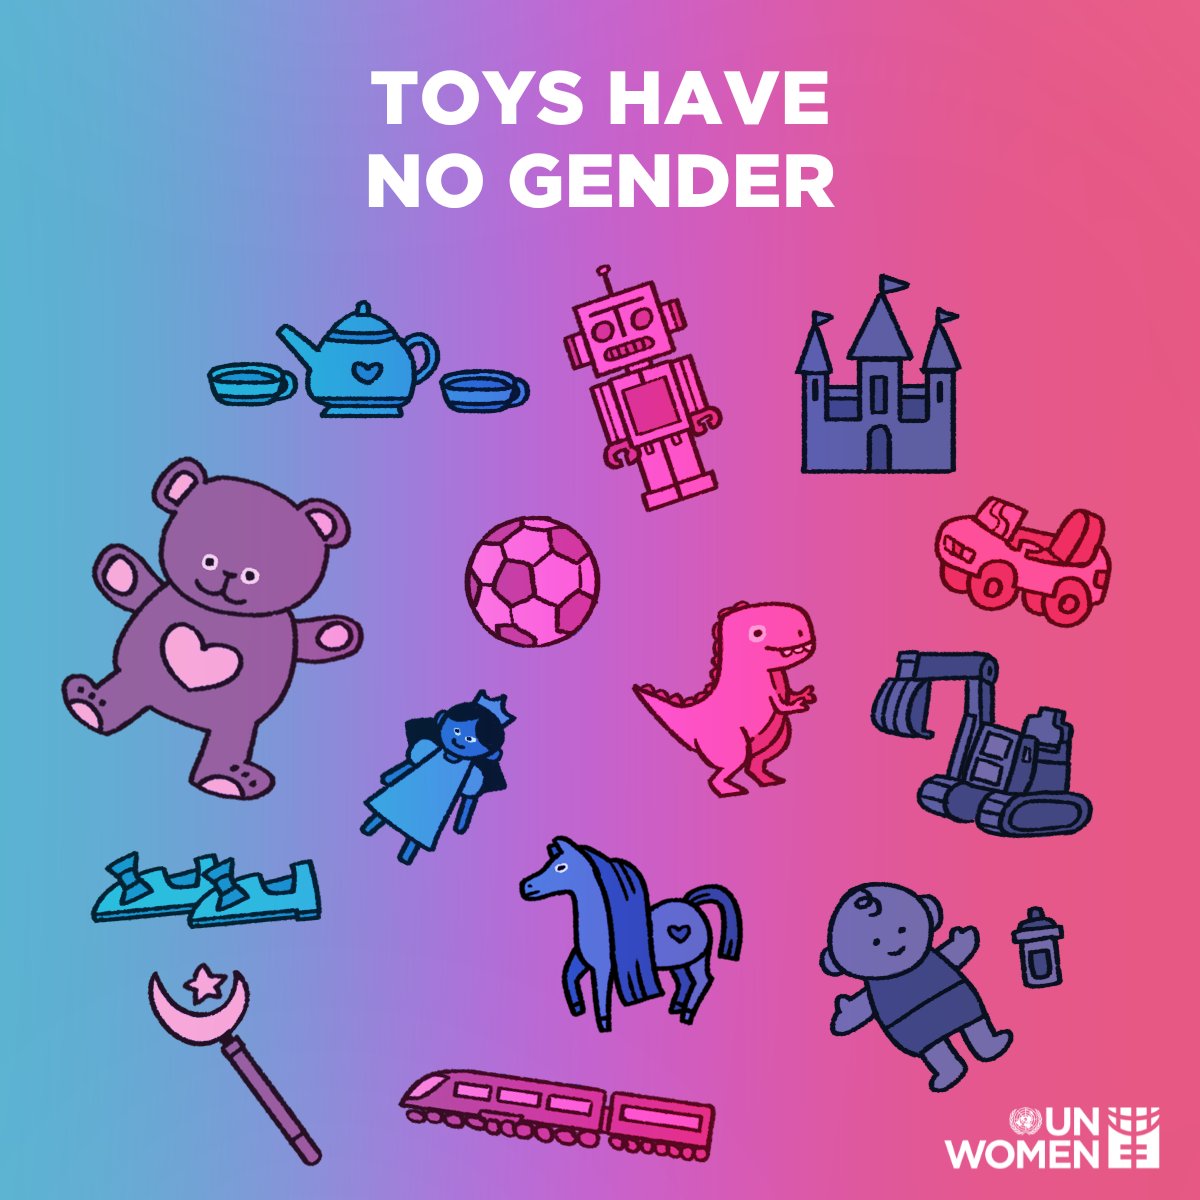 Let us teach our kids  about a world where princesses can build rockets and superheroes can bake cookies.

Let's raise a generation that values inclusivity, empathy, and equal opportunities.

Are you with us?